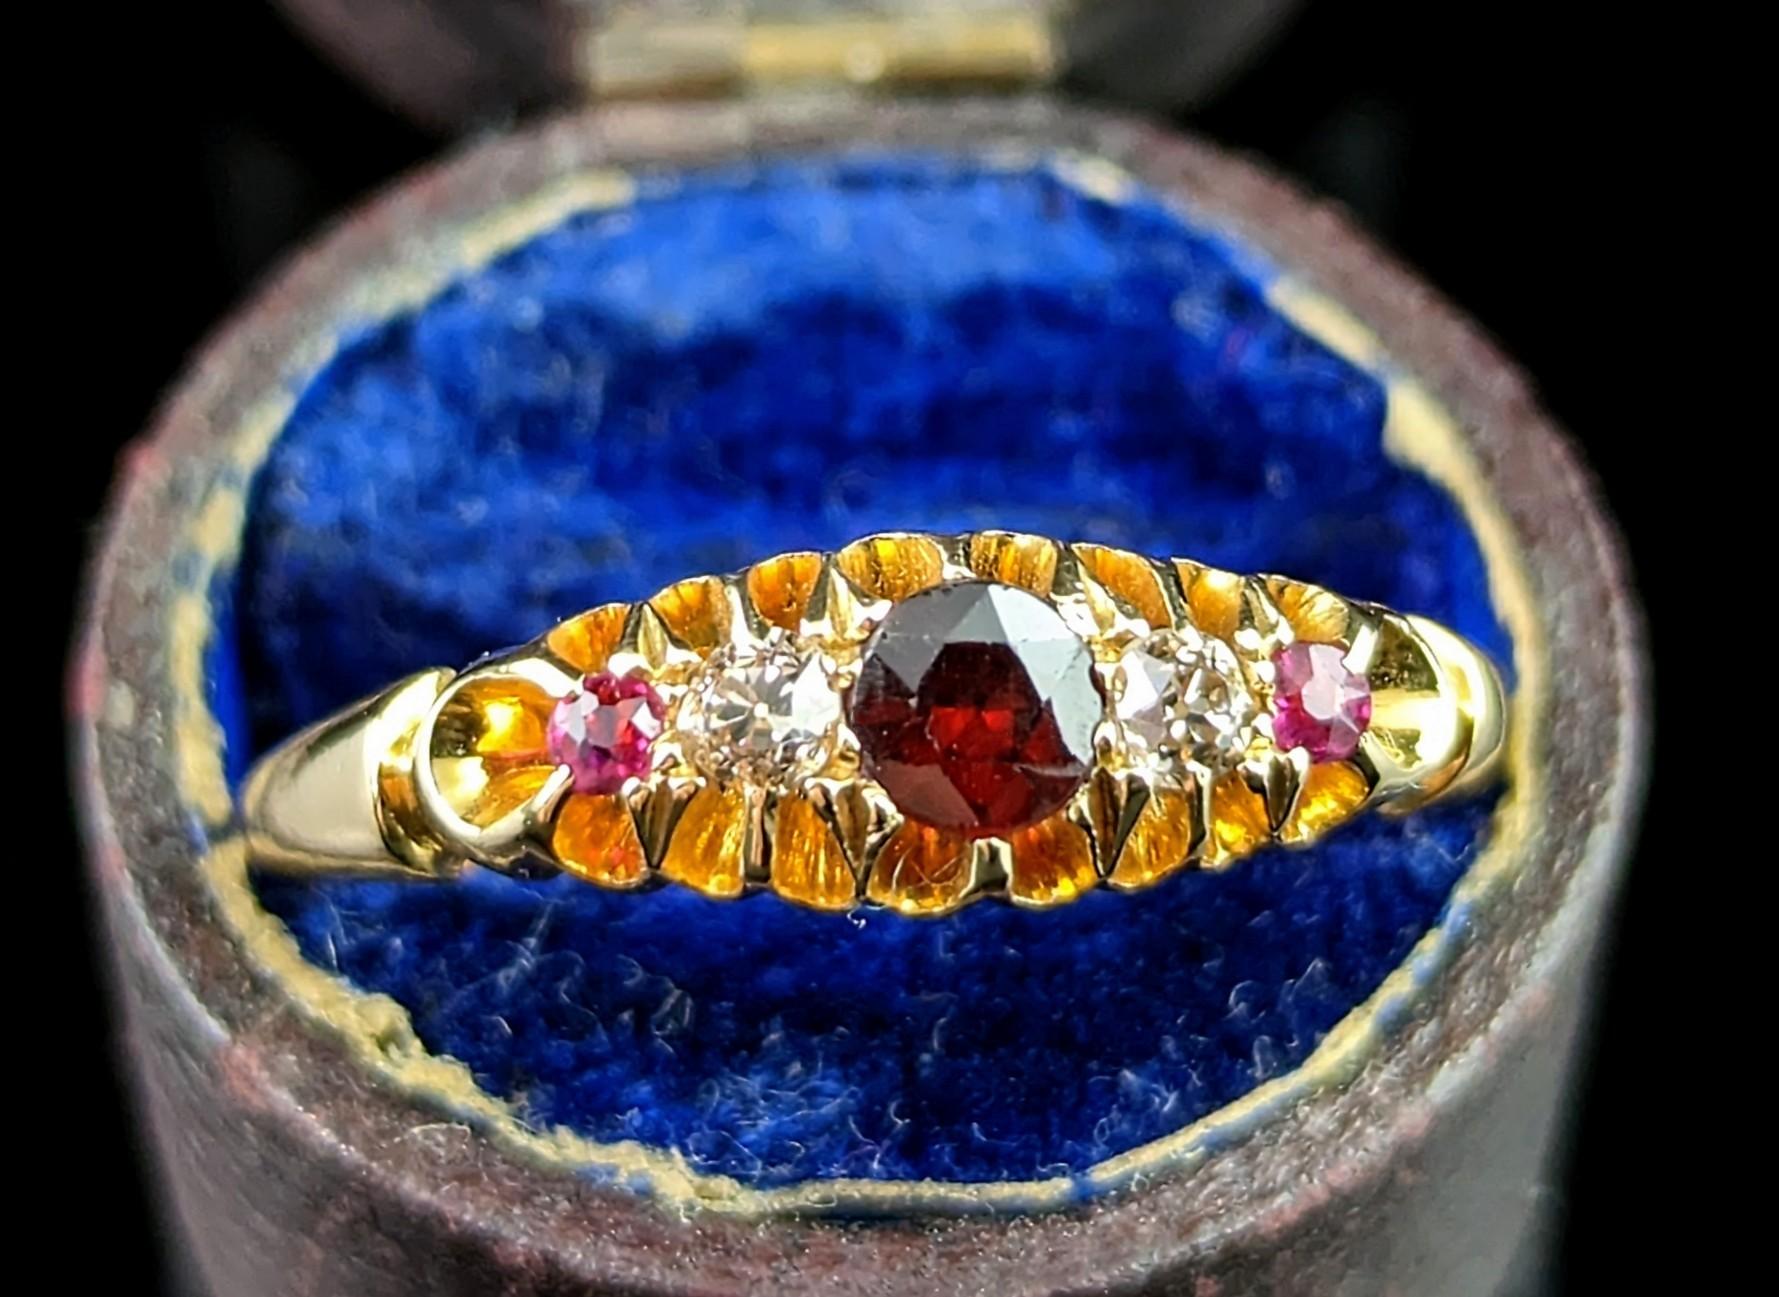 This beautiful antique, Edwardian era Ruby, Garnet and Diamond ring is an unusual stone combination in tones that complement each other wonderfully.

It is a boat head style of ring in rich, buttery 18kt yellow gold with gemstone set face.

It is